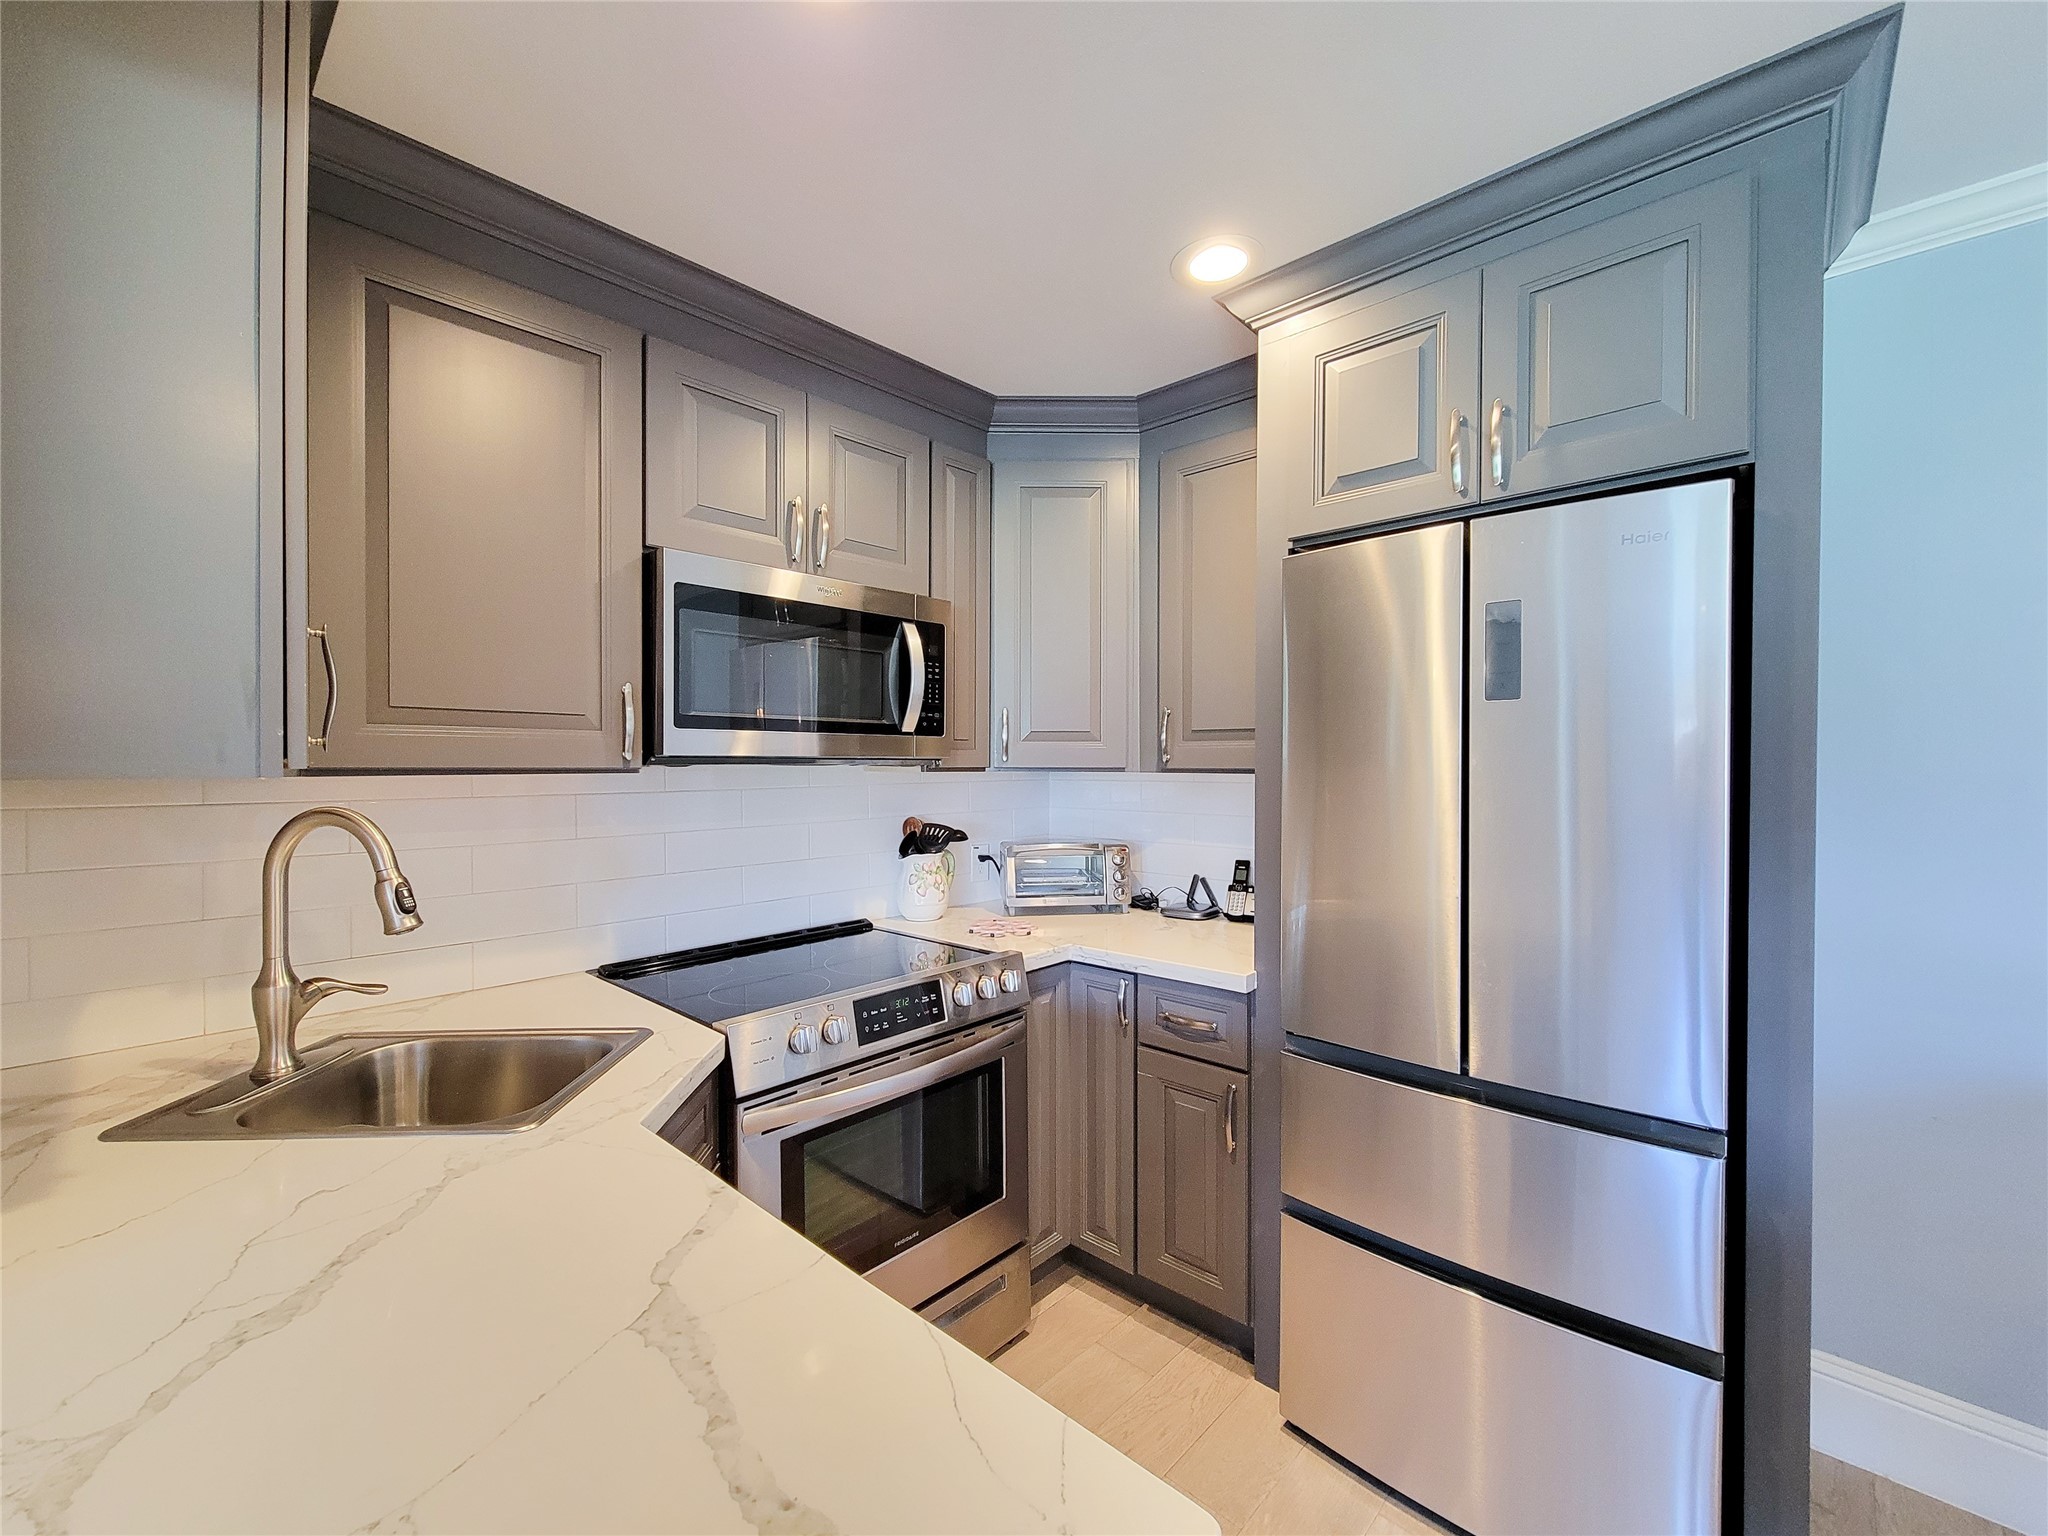 All new kitchen with stainless steel appliances! The beautiful fridge stays with the unit.